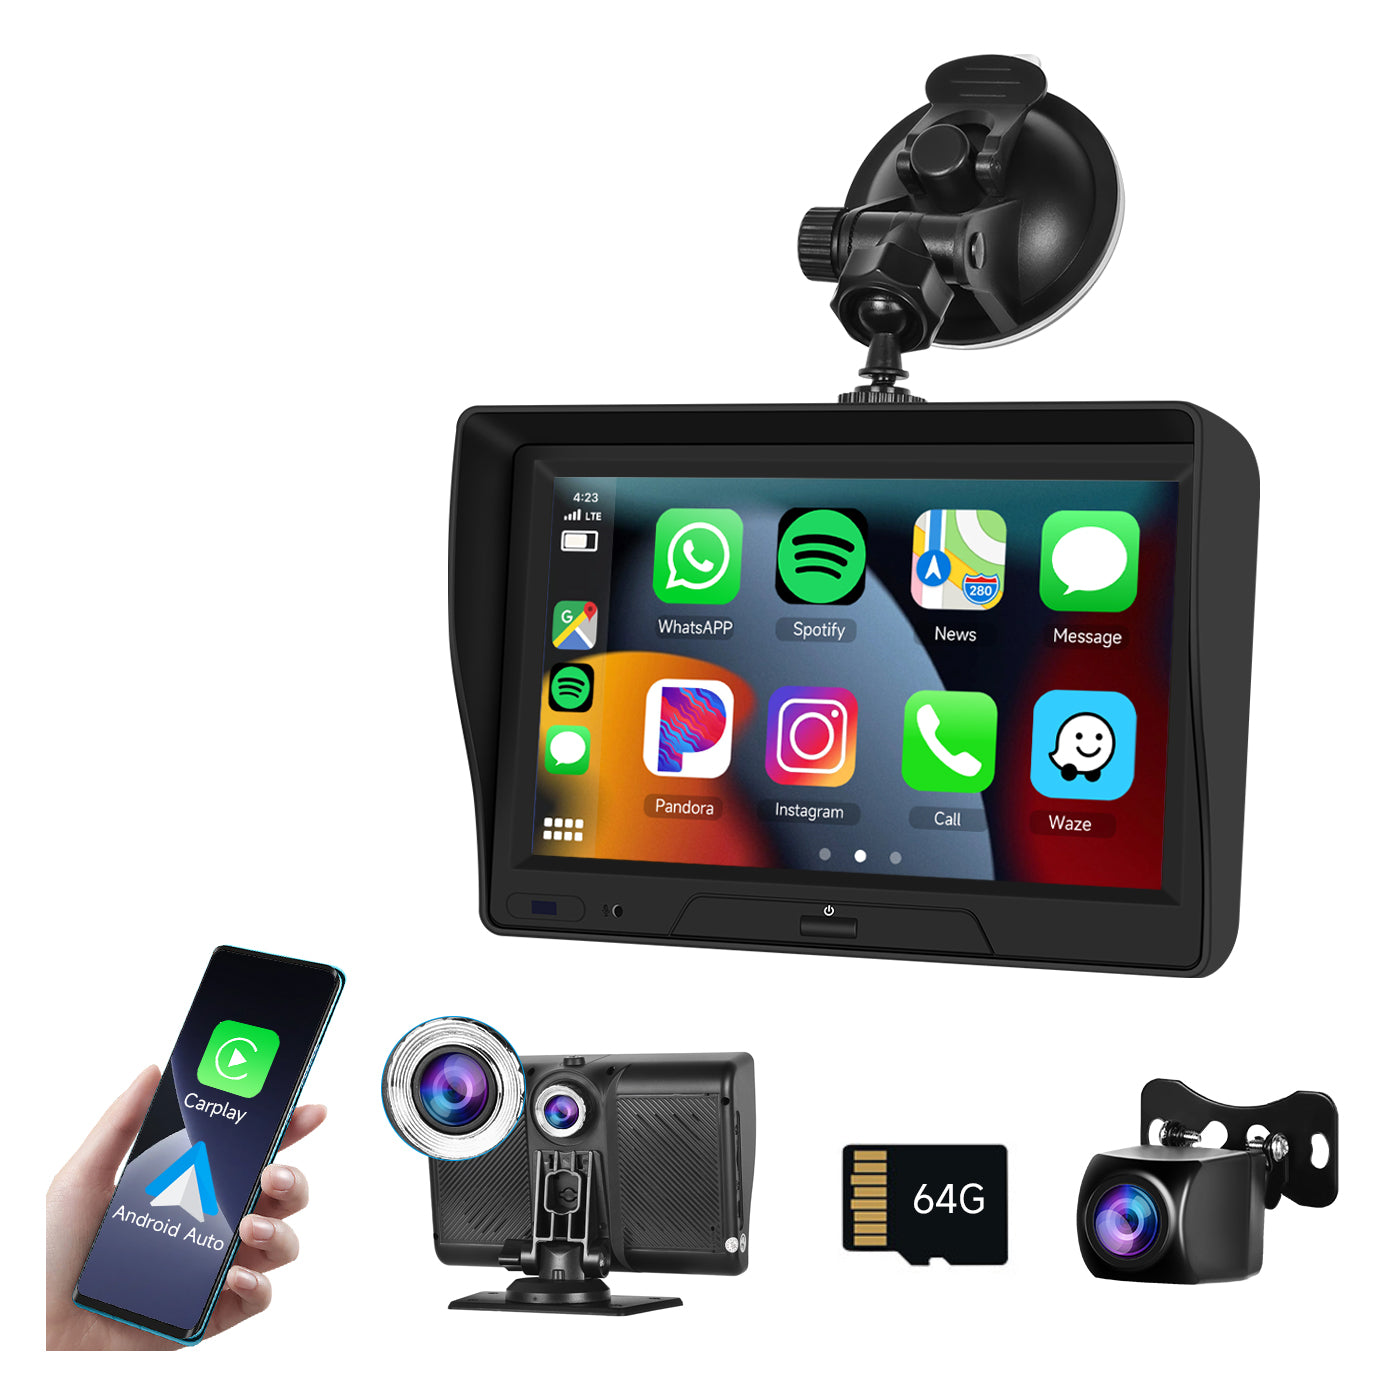 PODOFO Newest Portable Car Stereo with Wireless Carplay Android Auto,